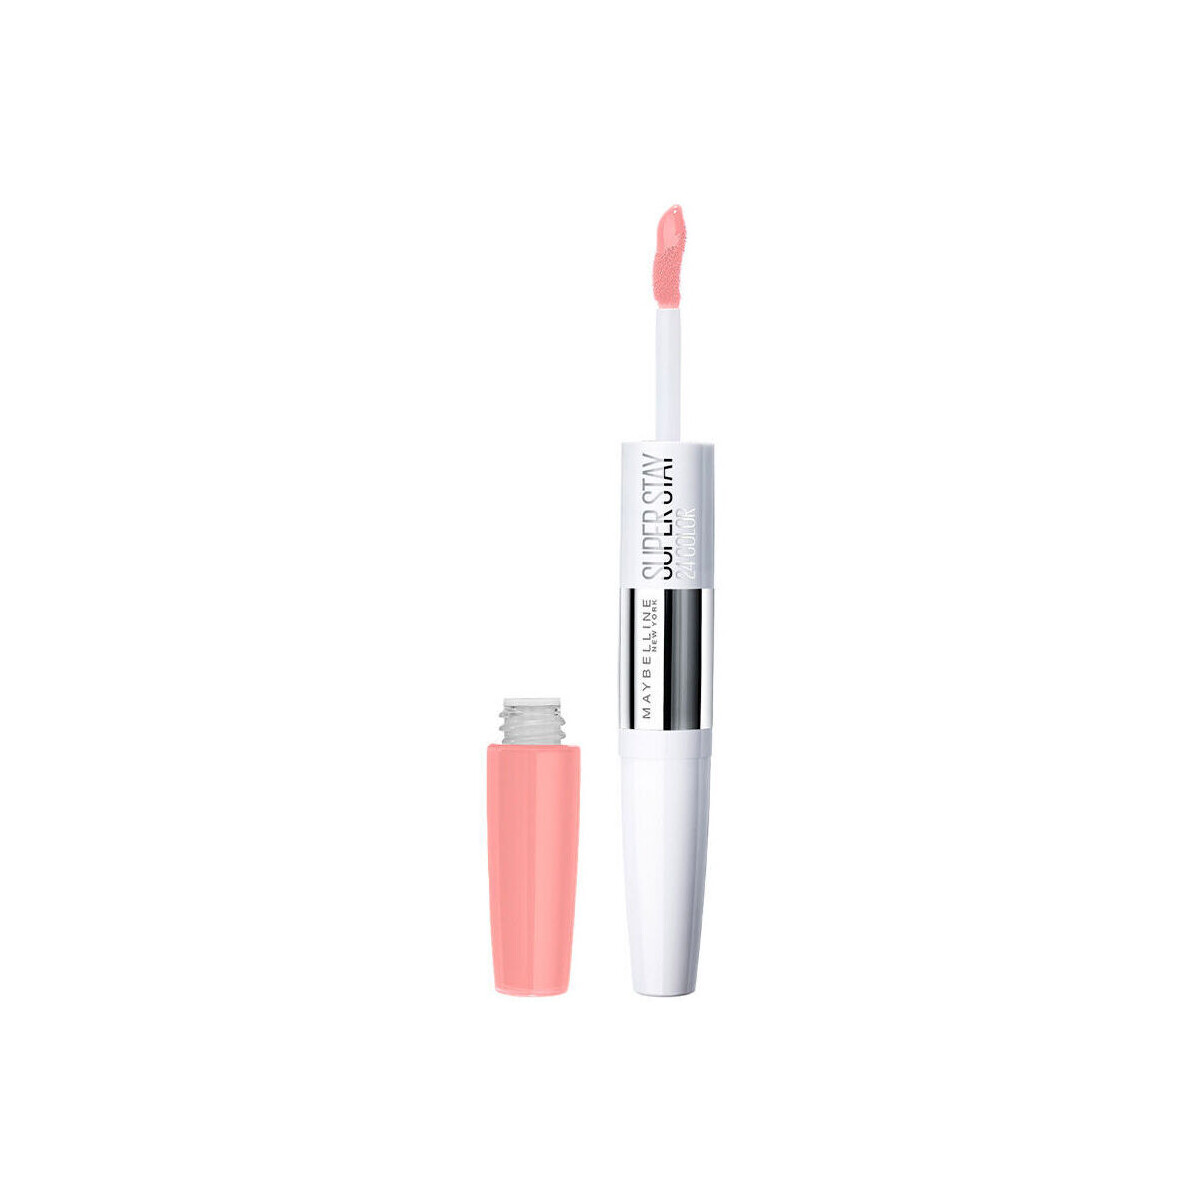 Beauté Femme Rouges à lèvres Maybelline New York Superstay 24h Lip Color 620-in The Nude 